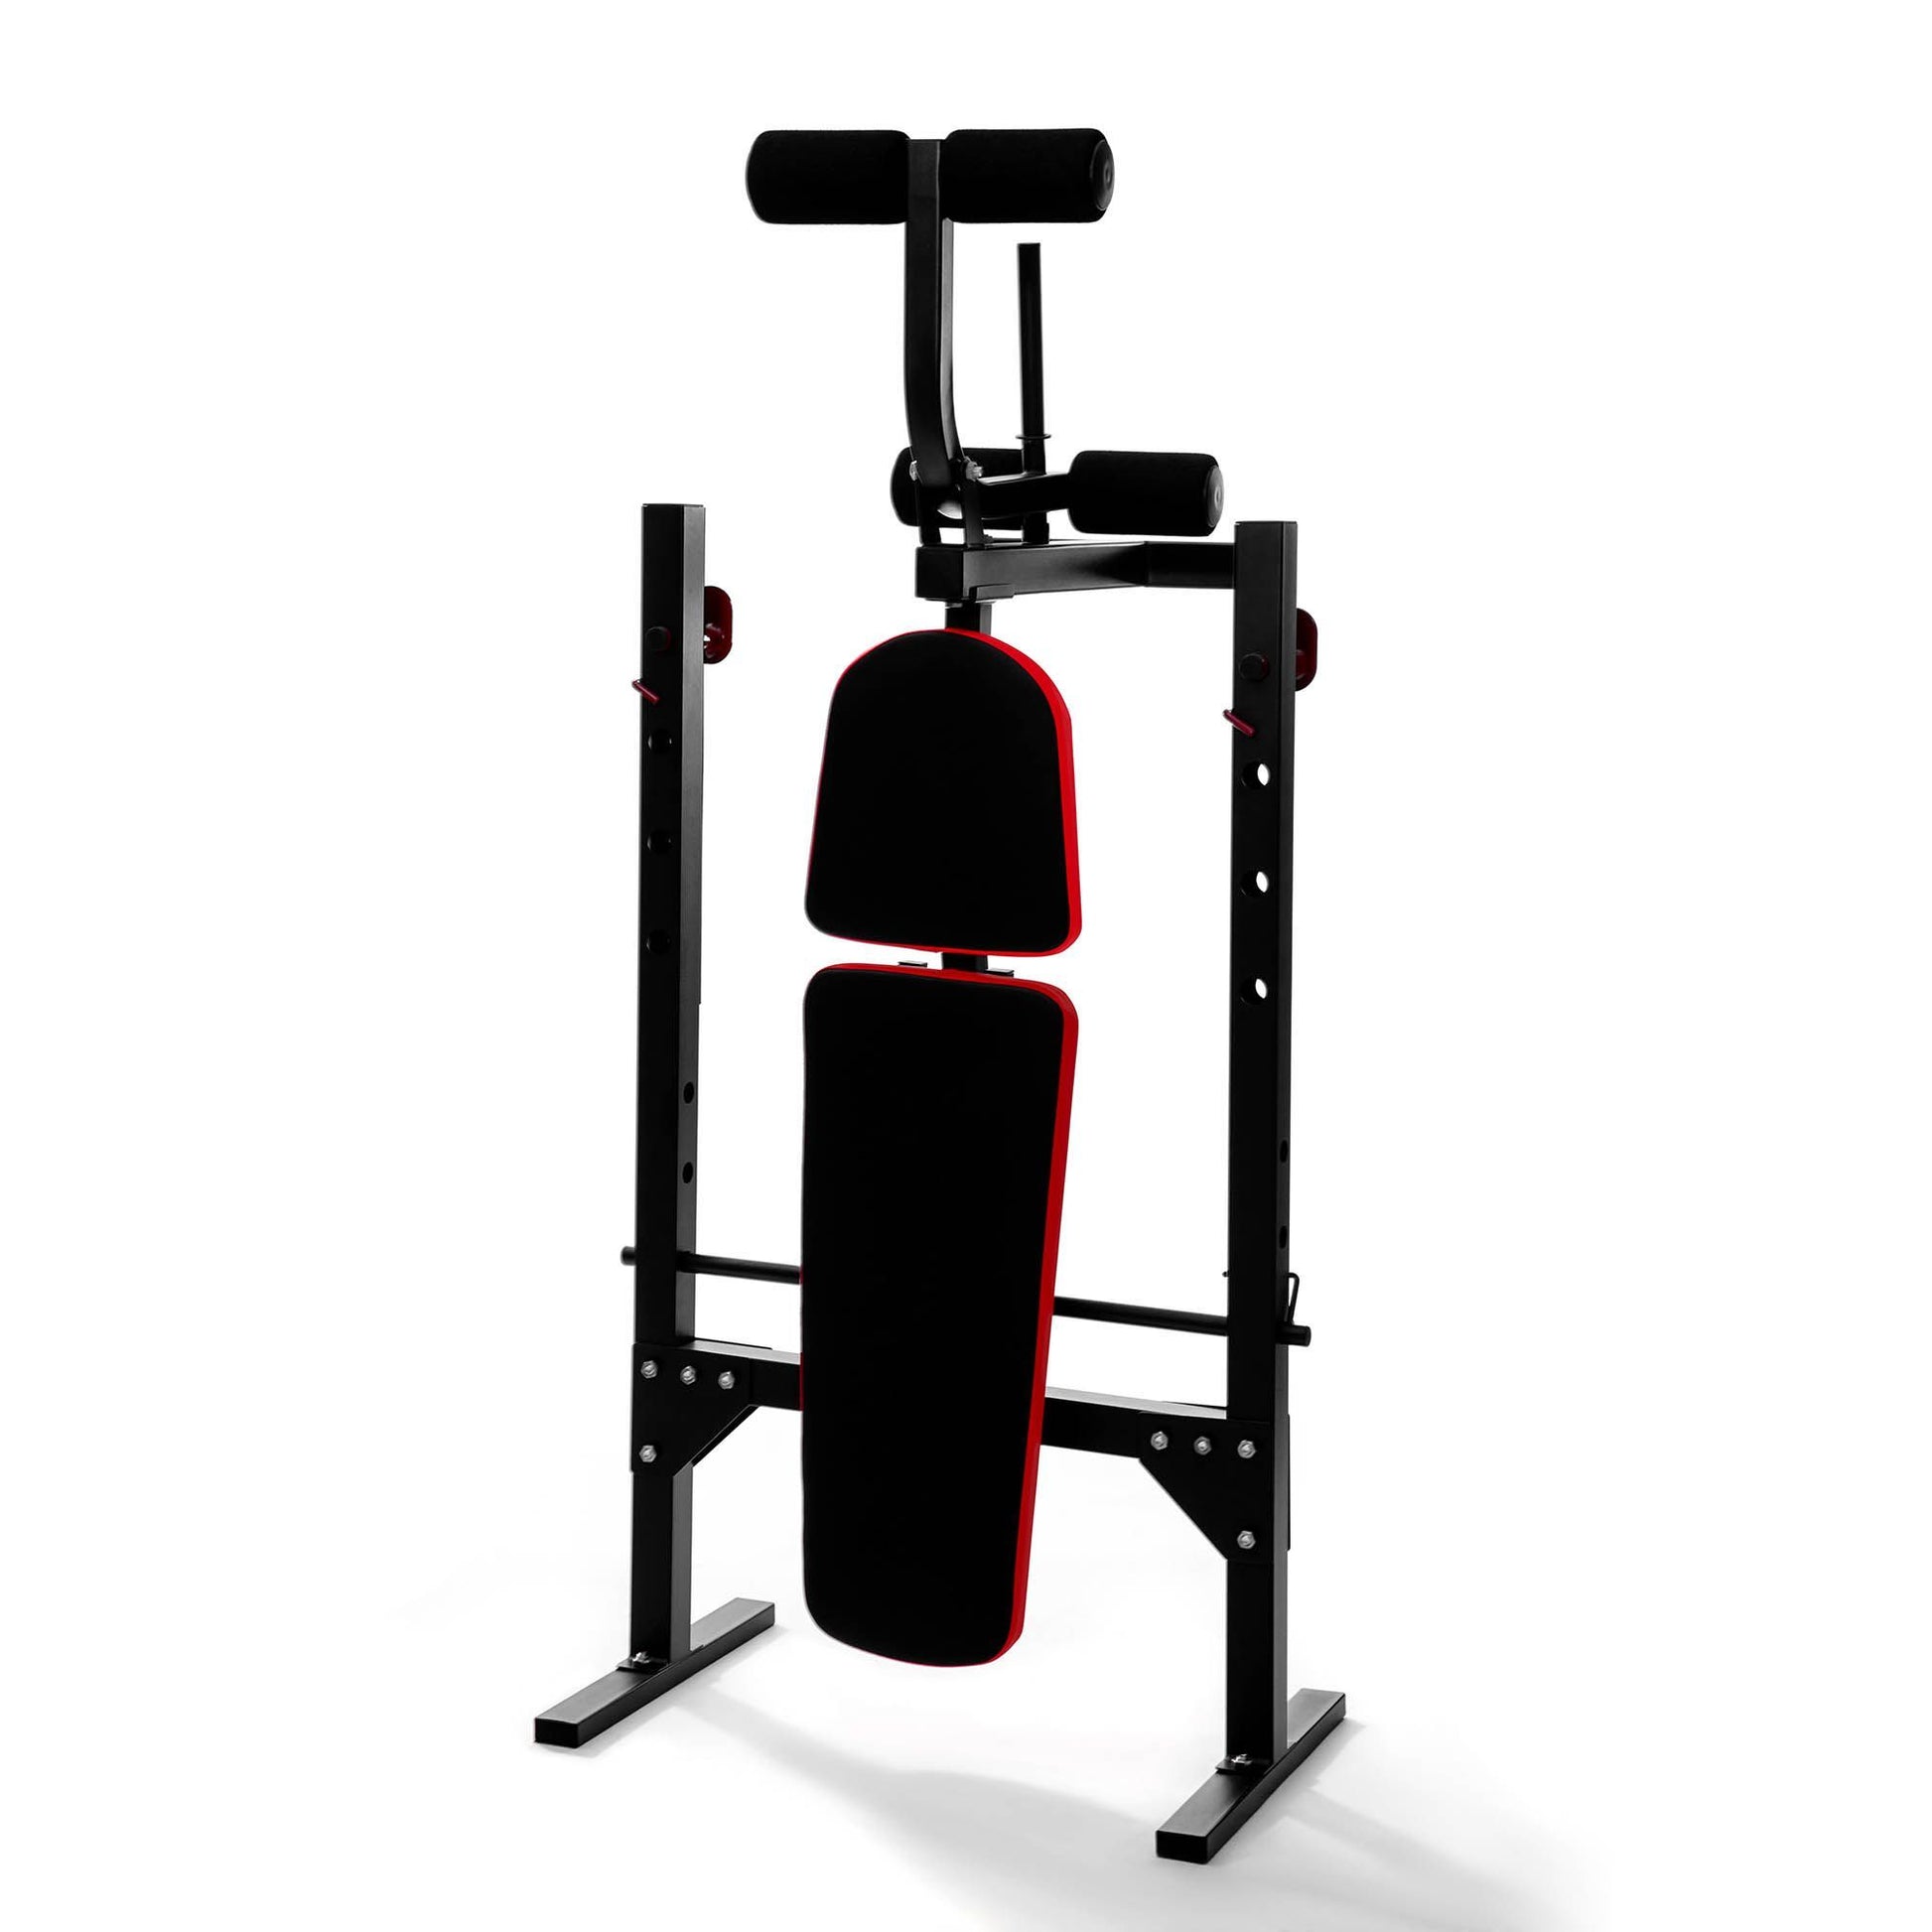 |Viavito SX200 Folding Barbell Weight Bench and 50kg Cast Iron Weight Set - Angle|